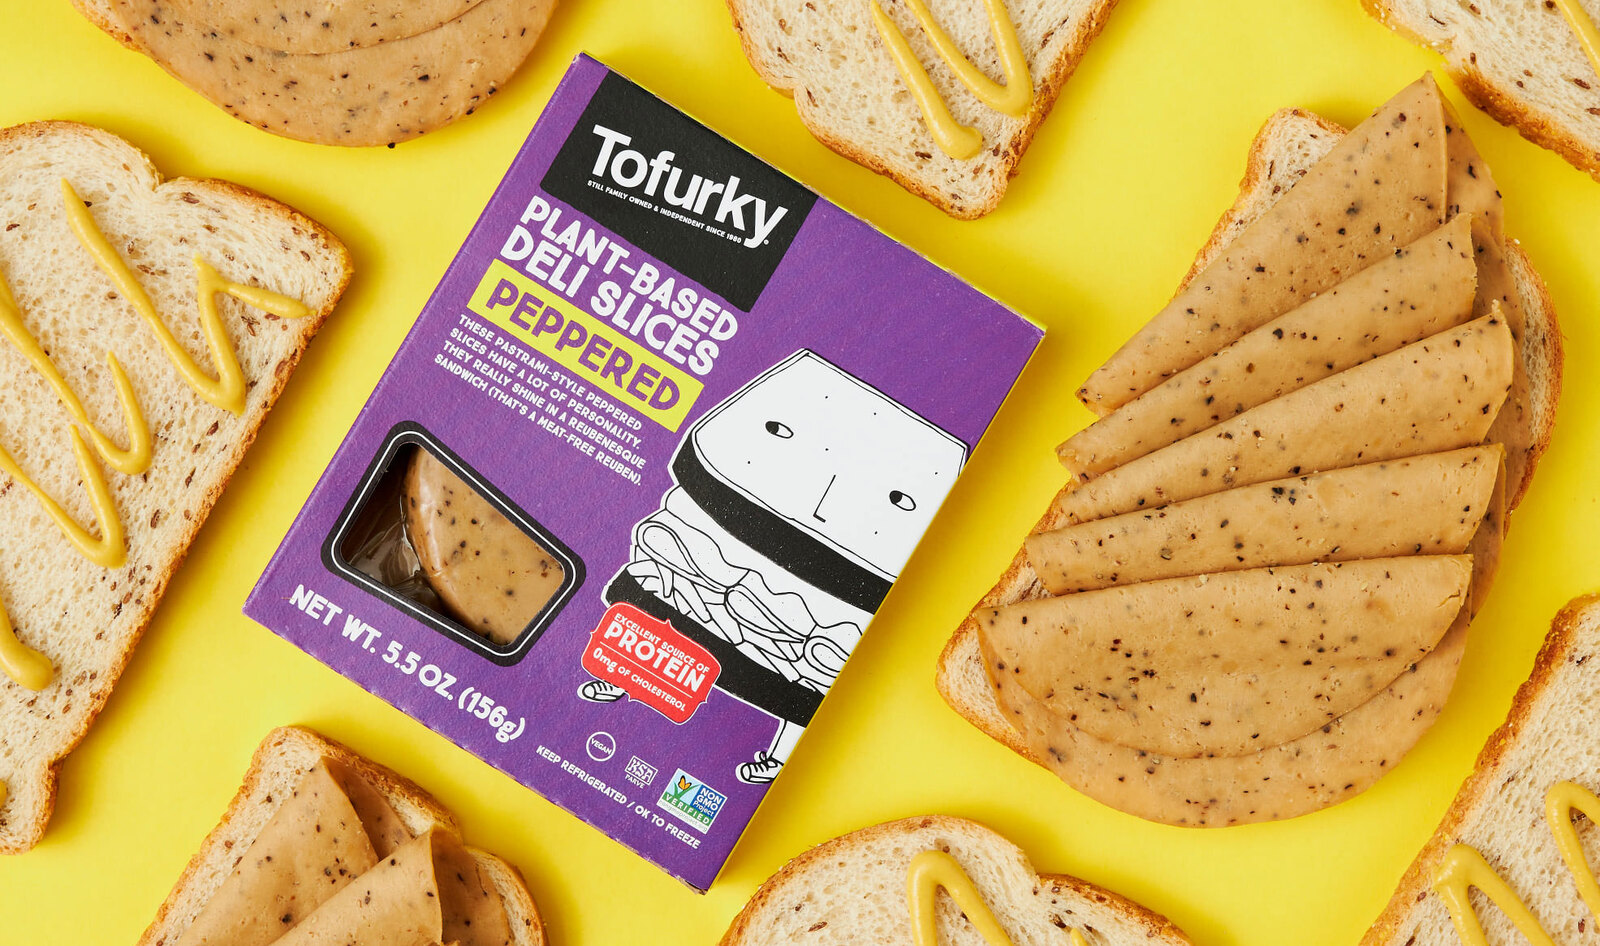 Tofurky to Expand Global Footprint With Acquisition by Tofu Supplier